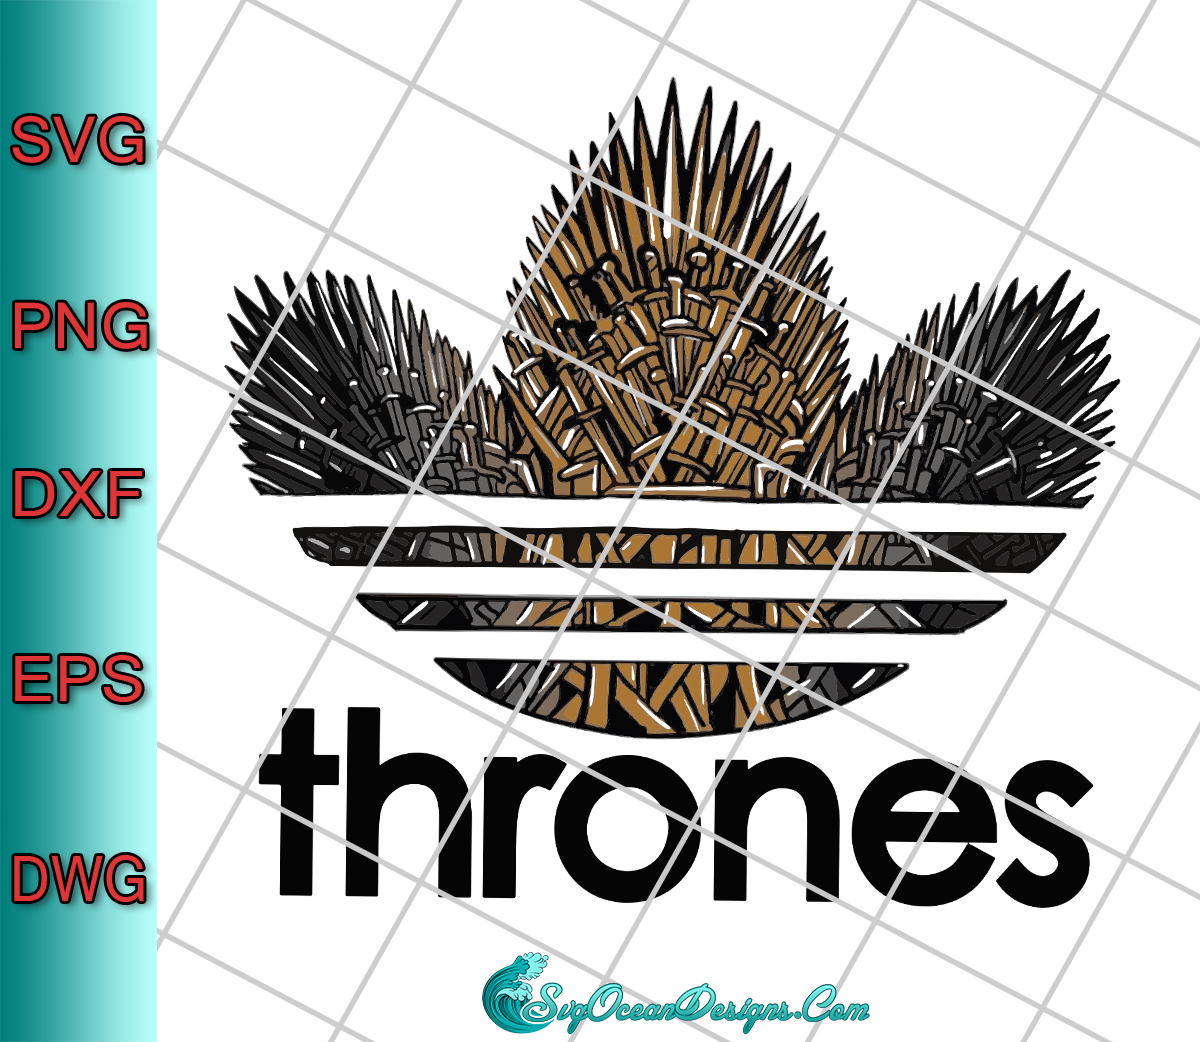 Download Game Of Thrones Svg Png Cricut Cut File Silhouette Cutting File Designs Digital Download SVG Cut Files